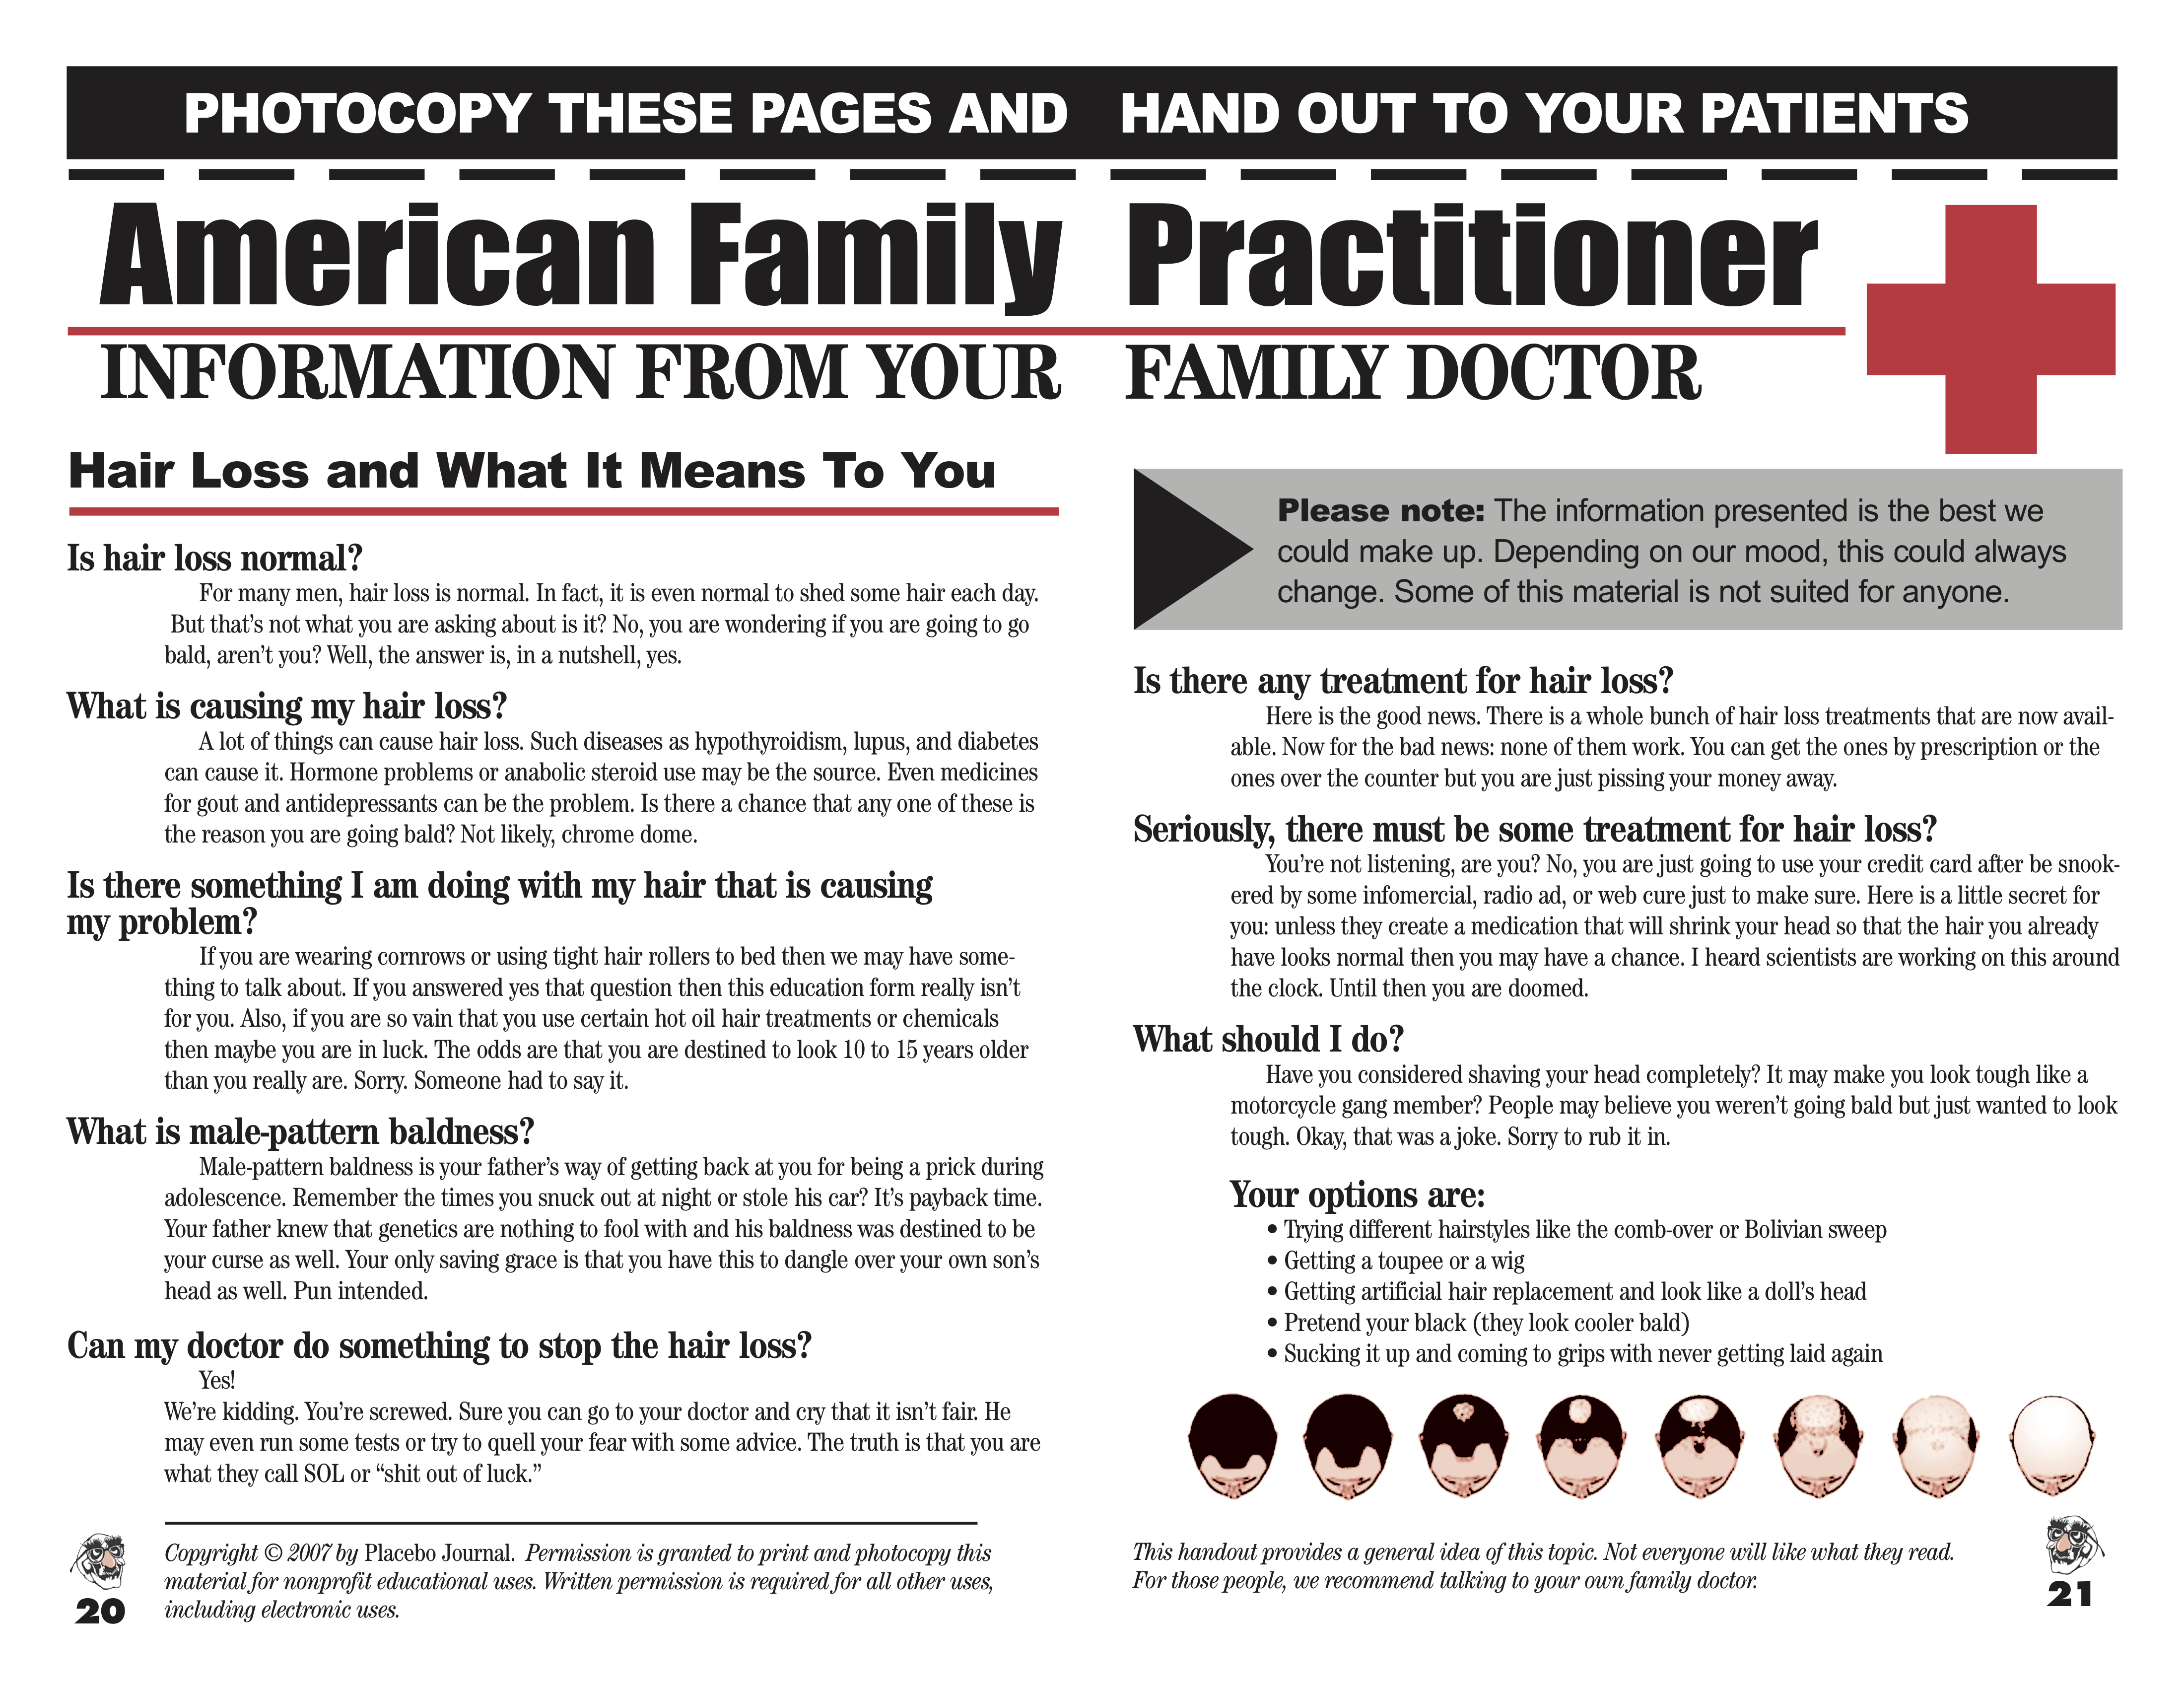 Friday Funny: Patient Education Form on Hair Loss - Authentic Medicine